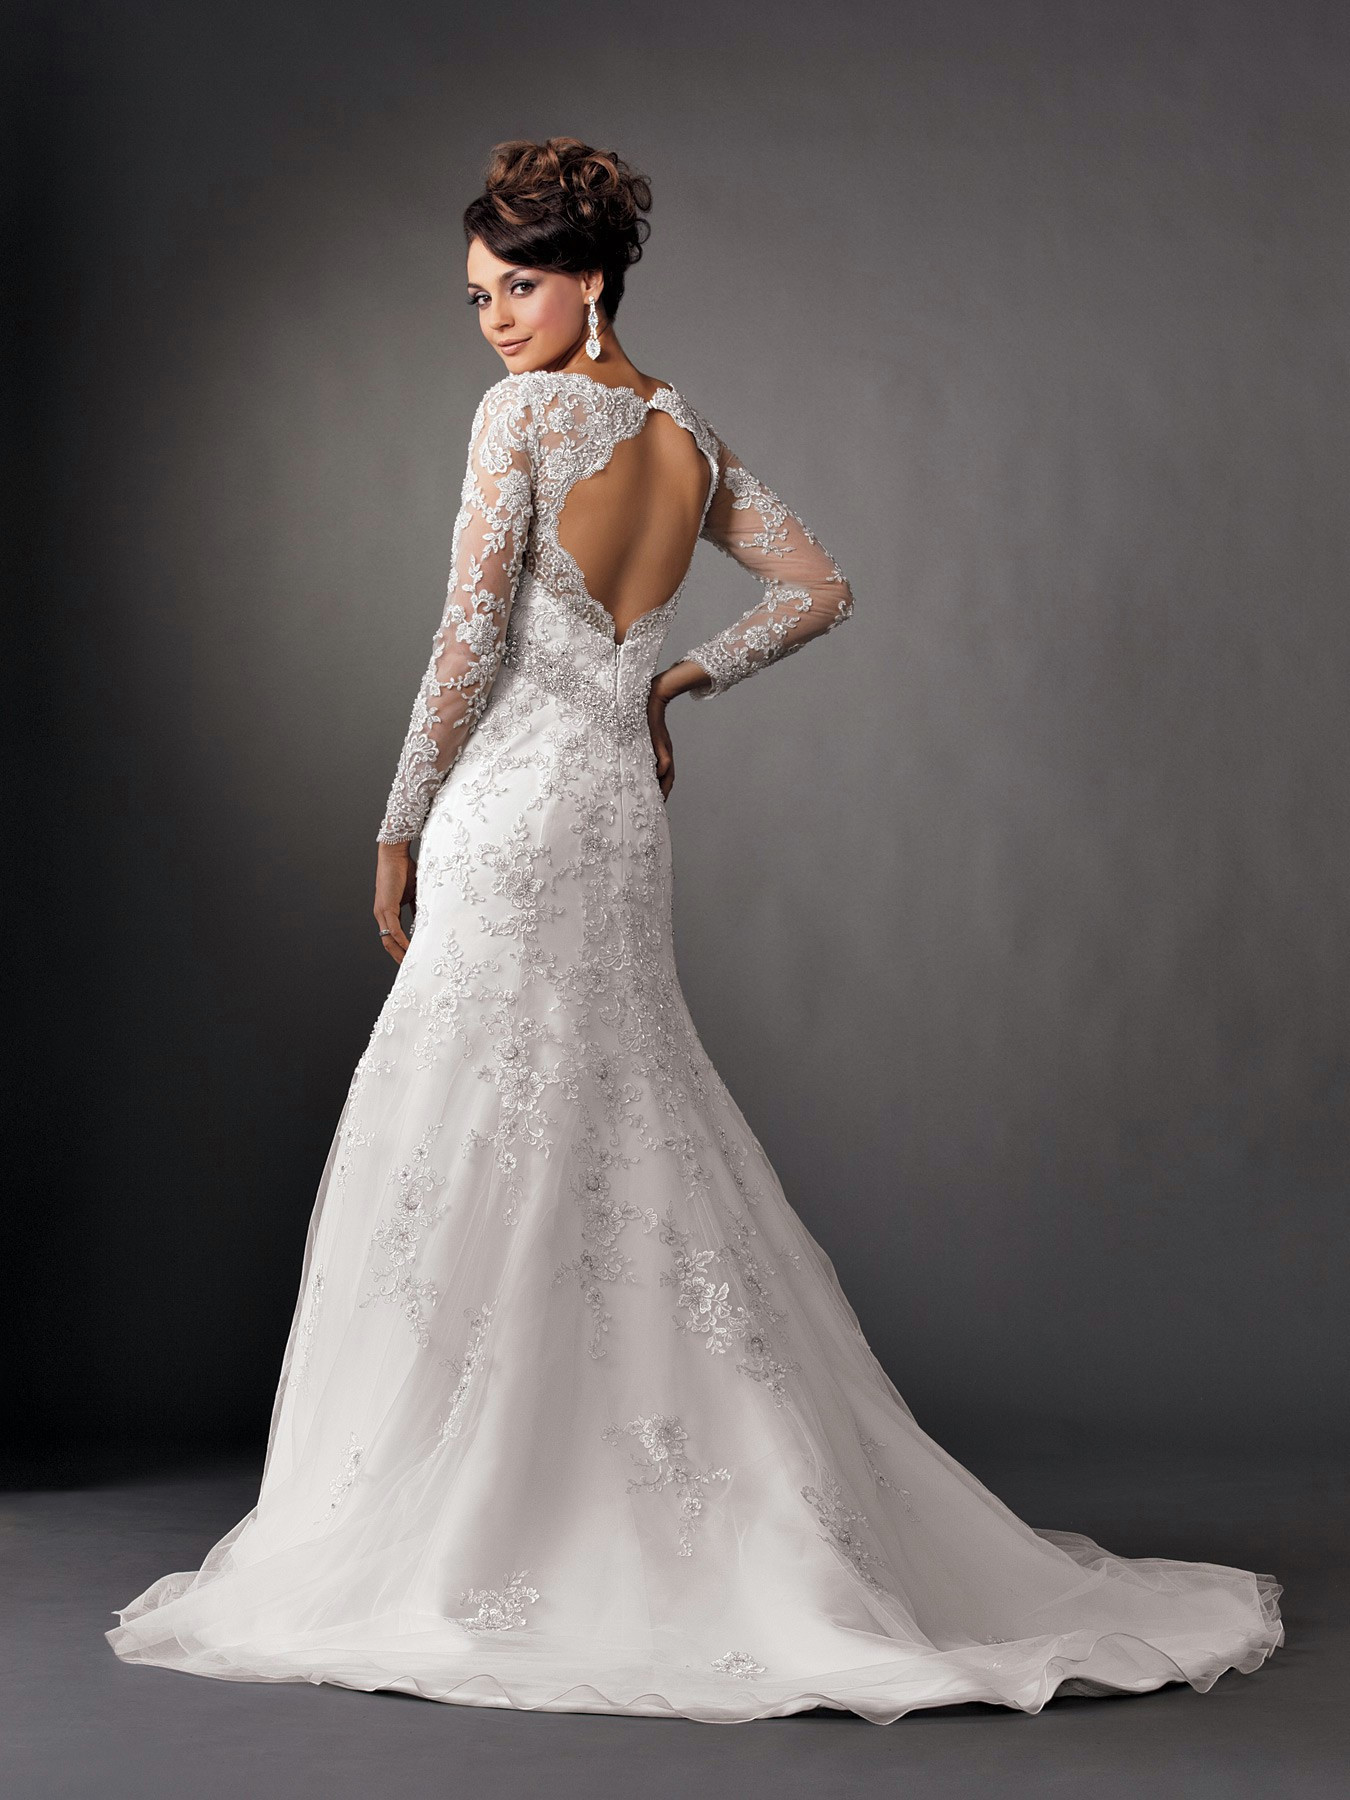 Wedding Dresses With Lace Sleeves
 2014 2015 Wedding Dress Trends Lace Sleeves